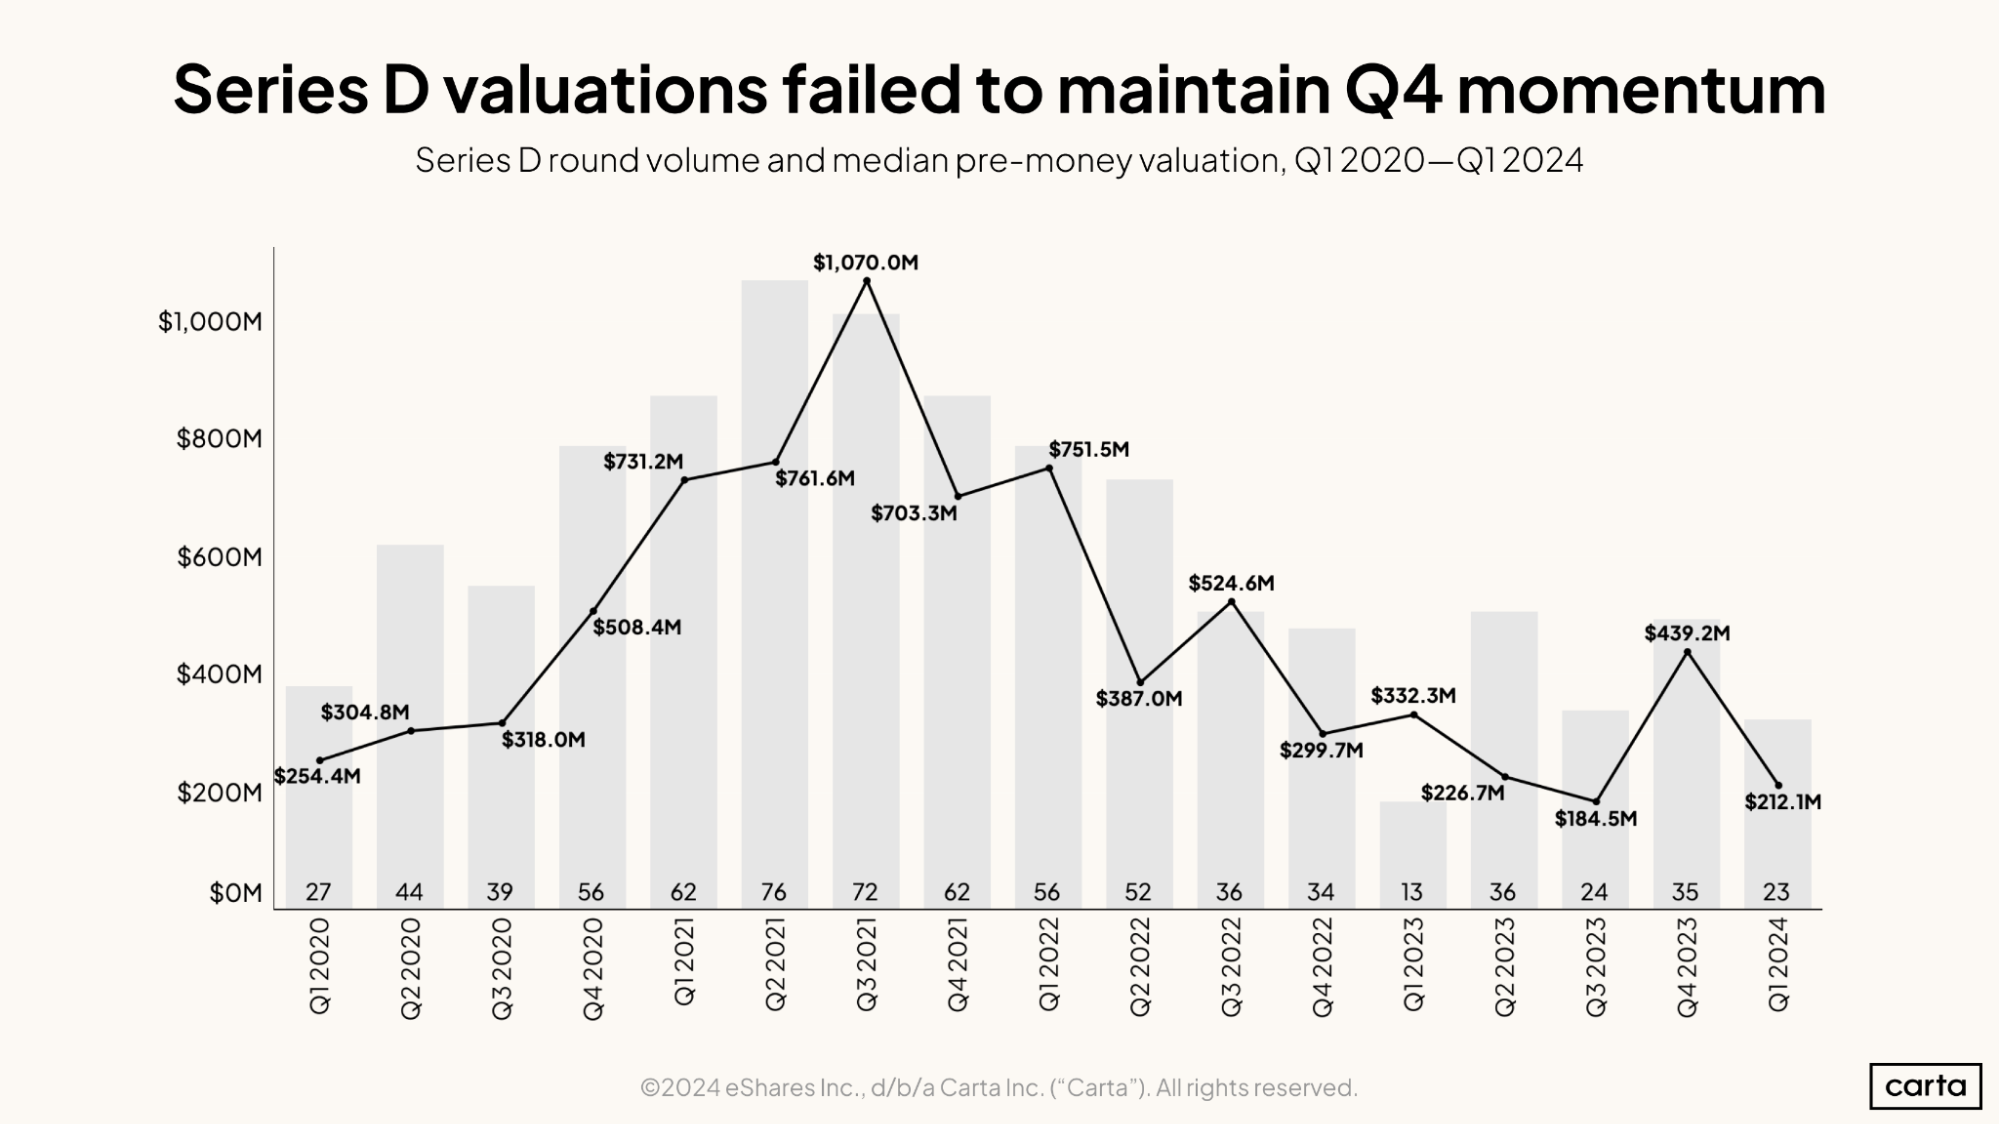 Series D valuations failed to maintain Q4 momentum